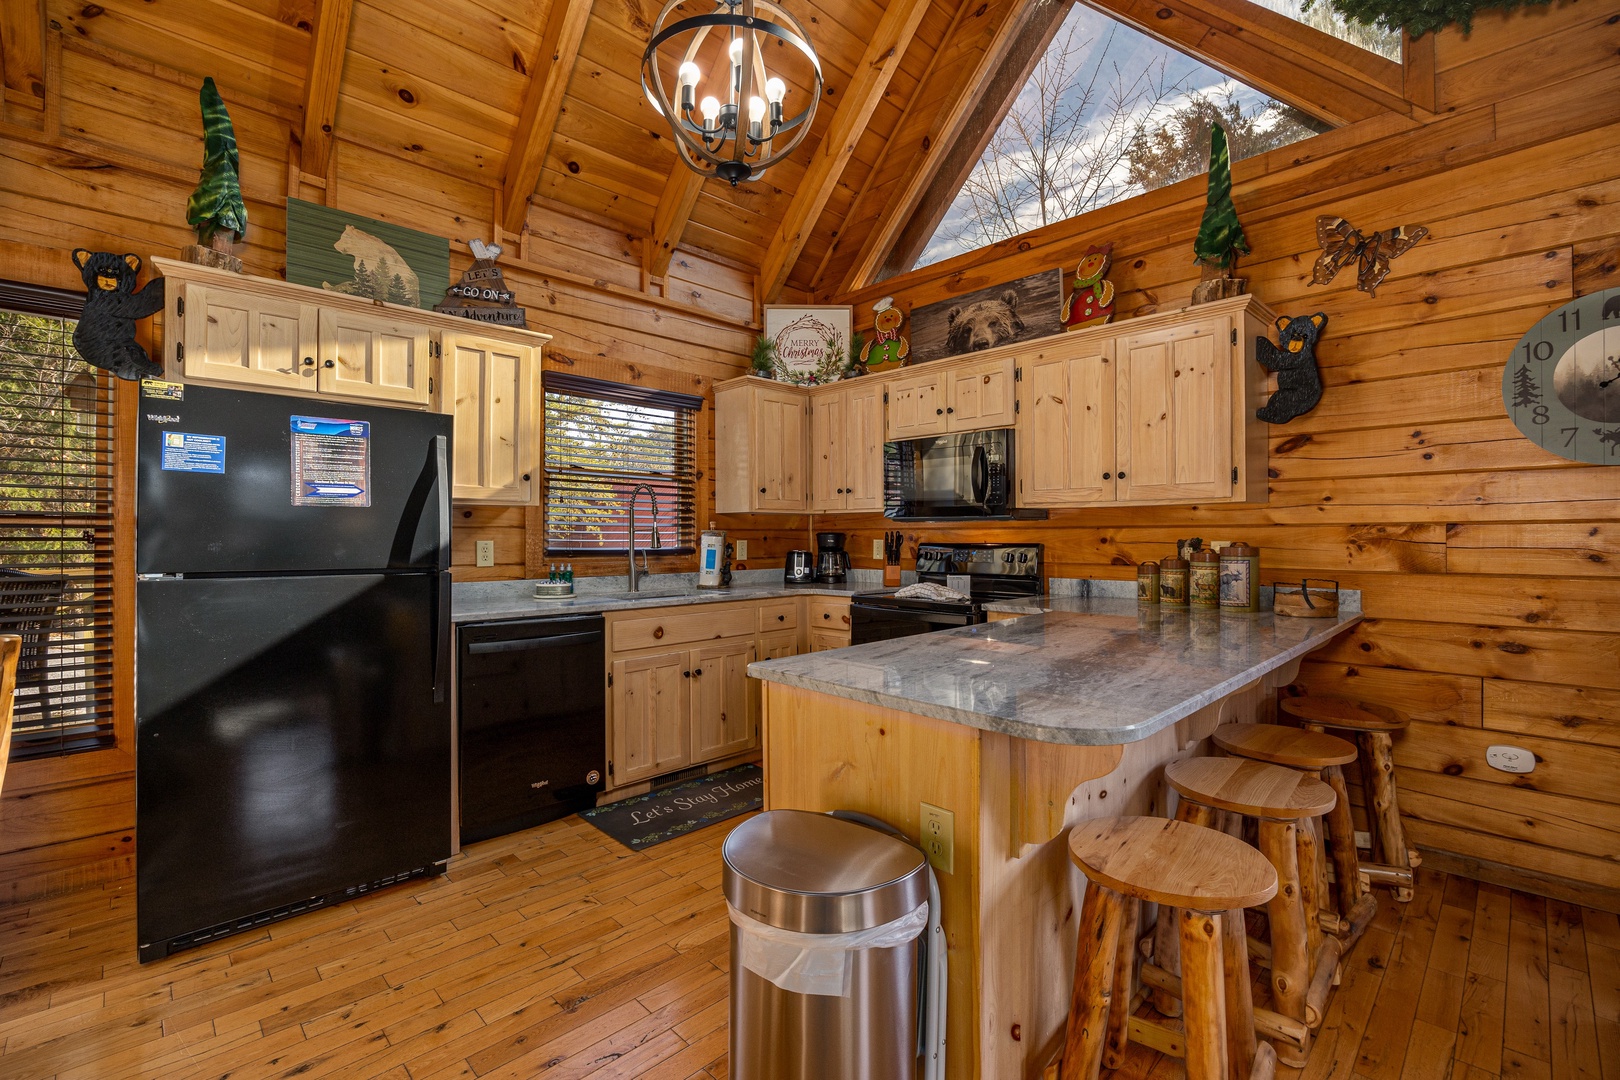 Kitchen with breakfast bar seating for 4 at Bear Feet Retreat, a 1 bedroom cabin rental located in pigeon forge